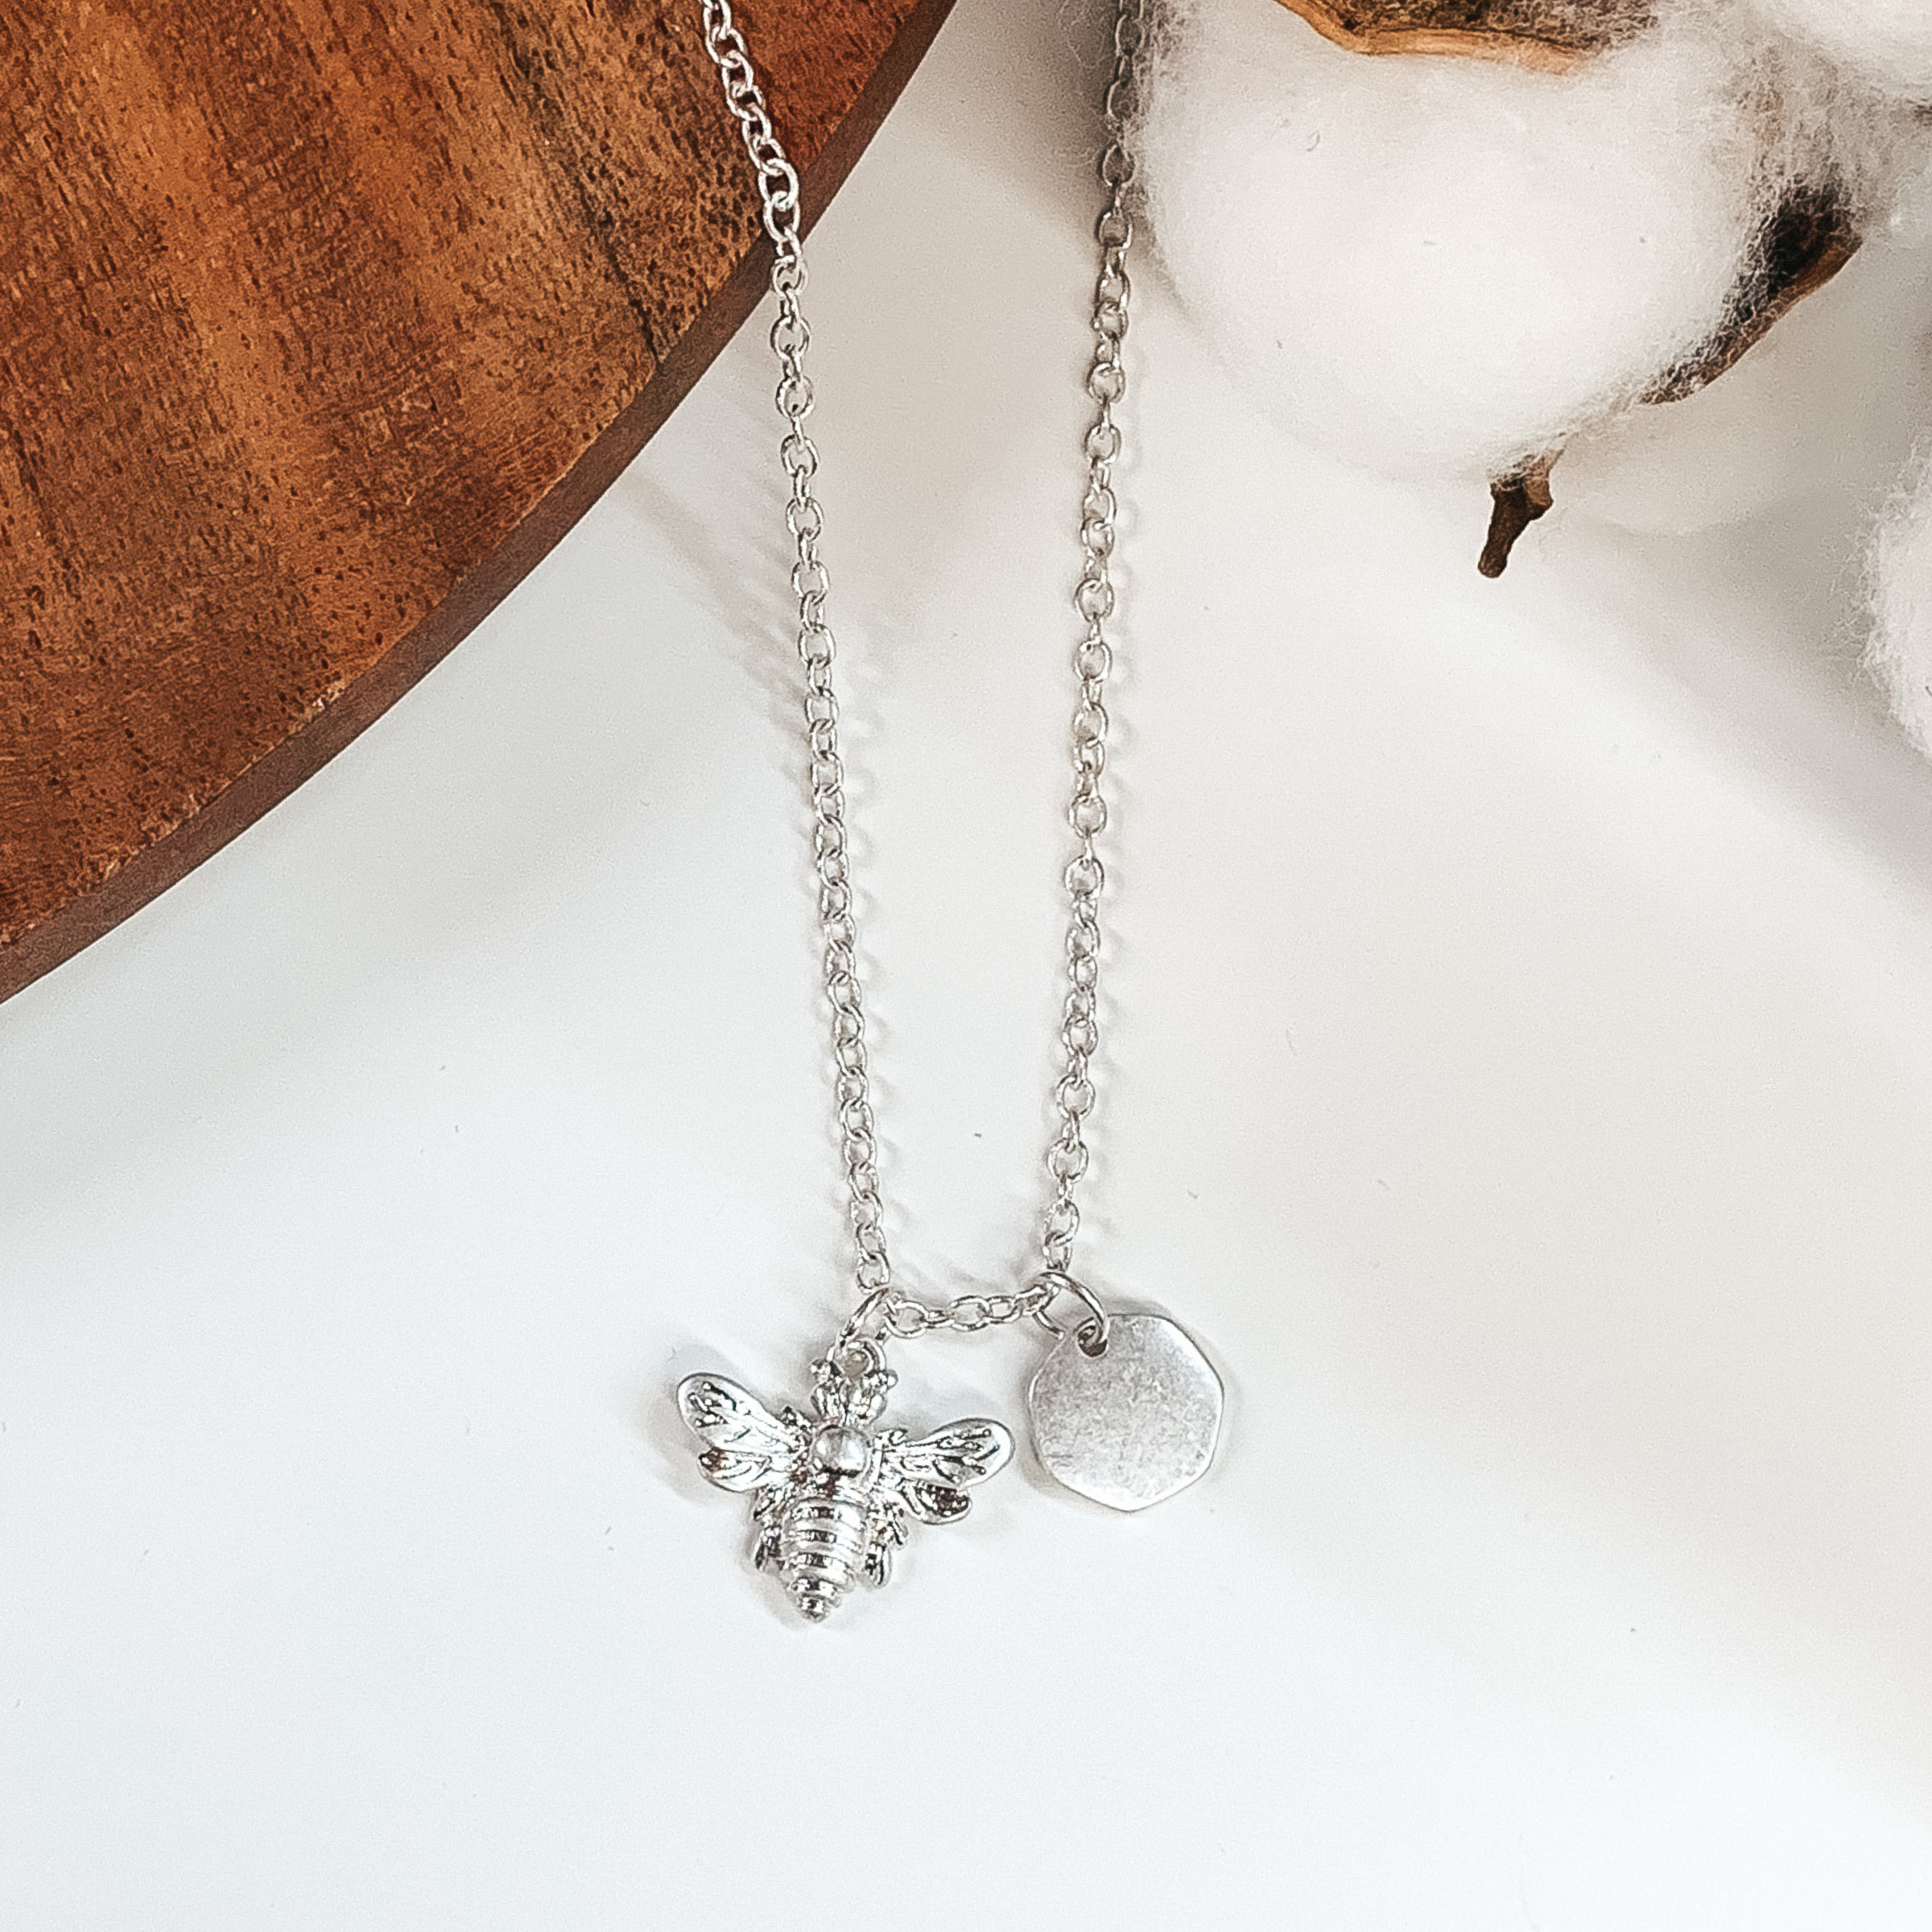 The Bee's Knees Necklace in Silver - Giddy Up Glamour Boutique